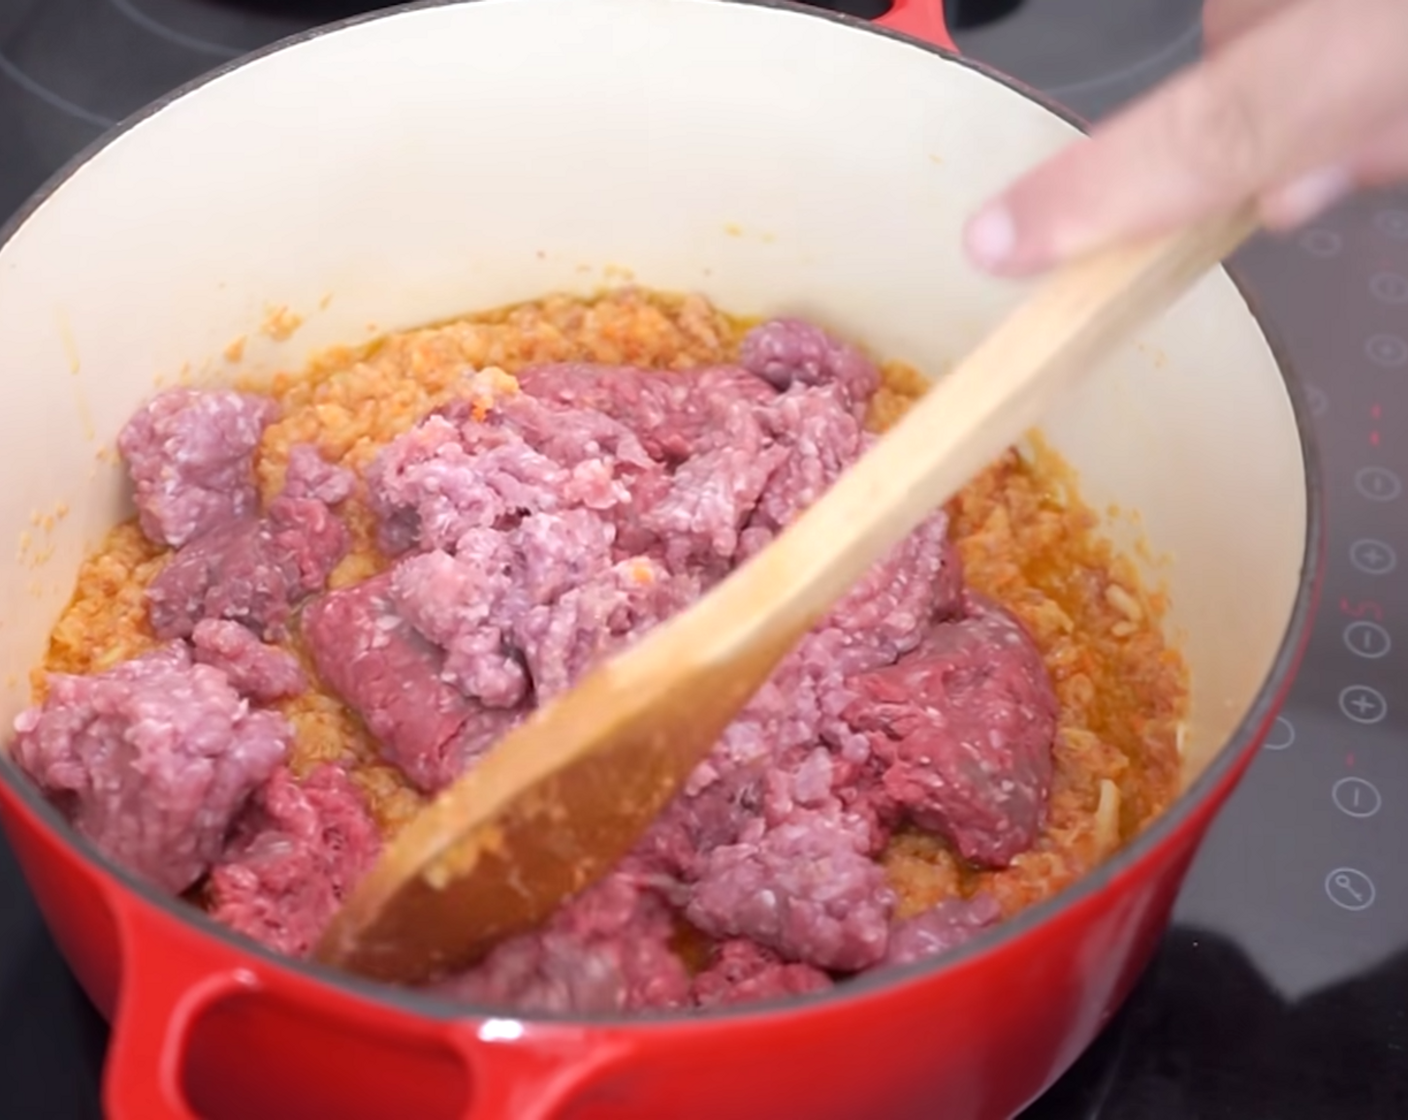 step 5 Add the Ground Beef (1.1 lb) and Ground Pork (7 oz) to your Bolognese sauce mix, breaking down the chunks of meat using a wooden spoon as you cook it.